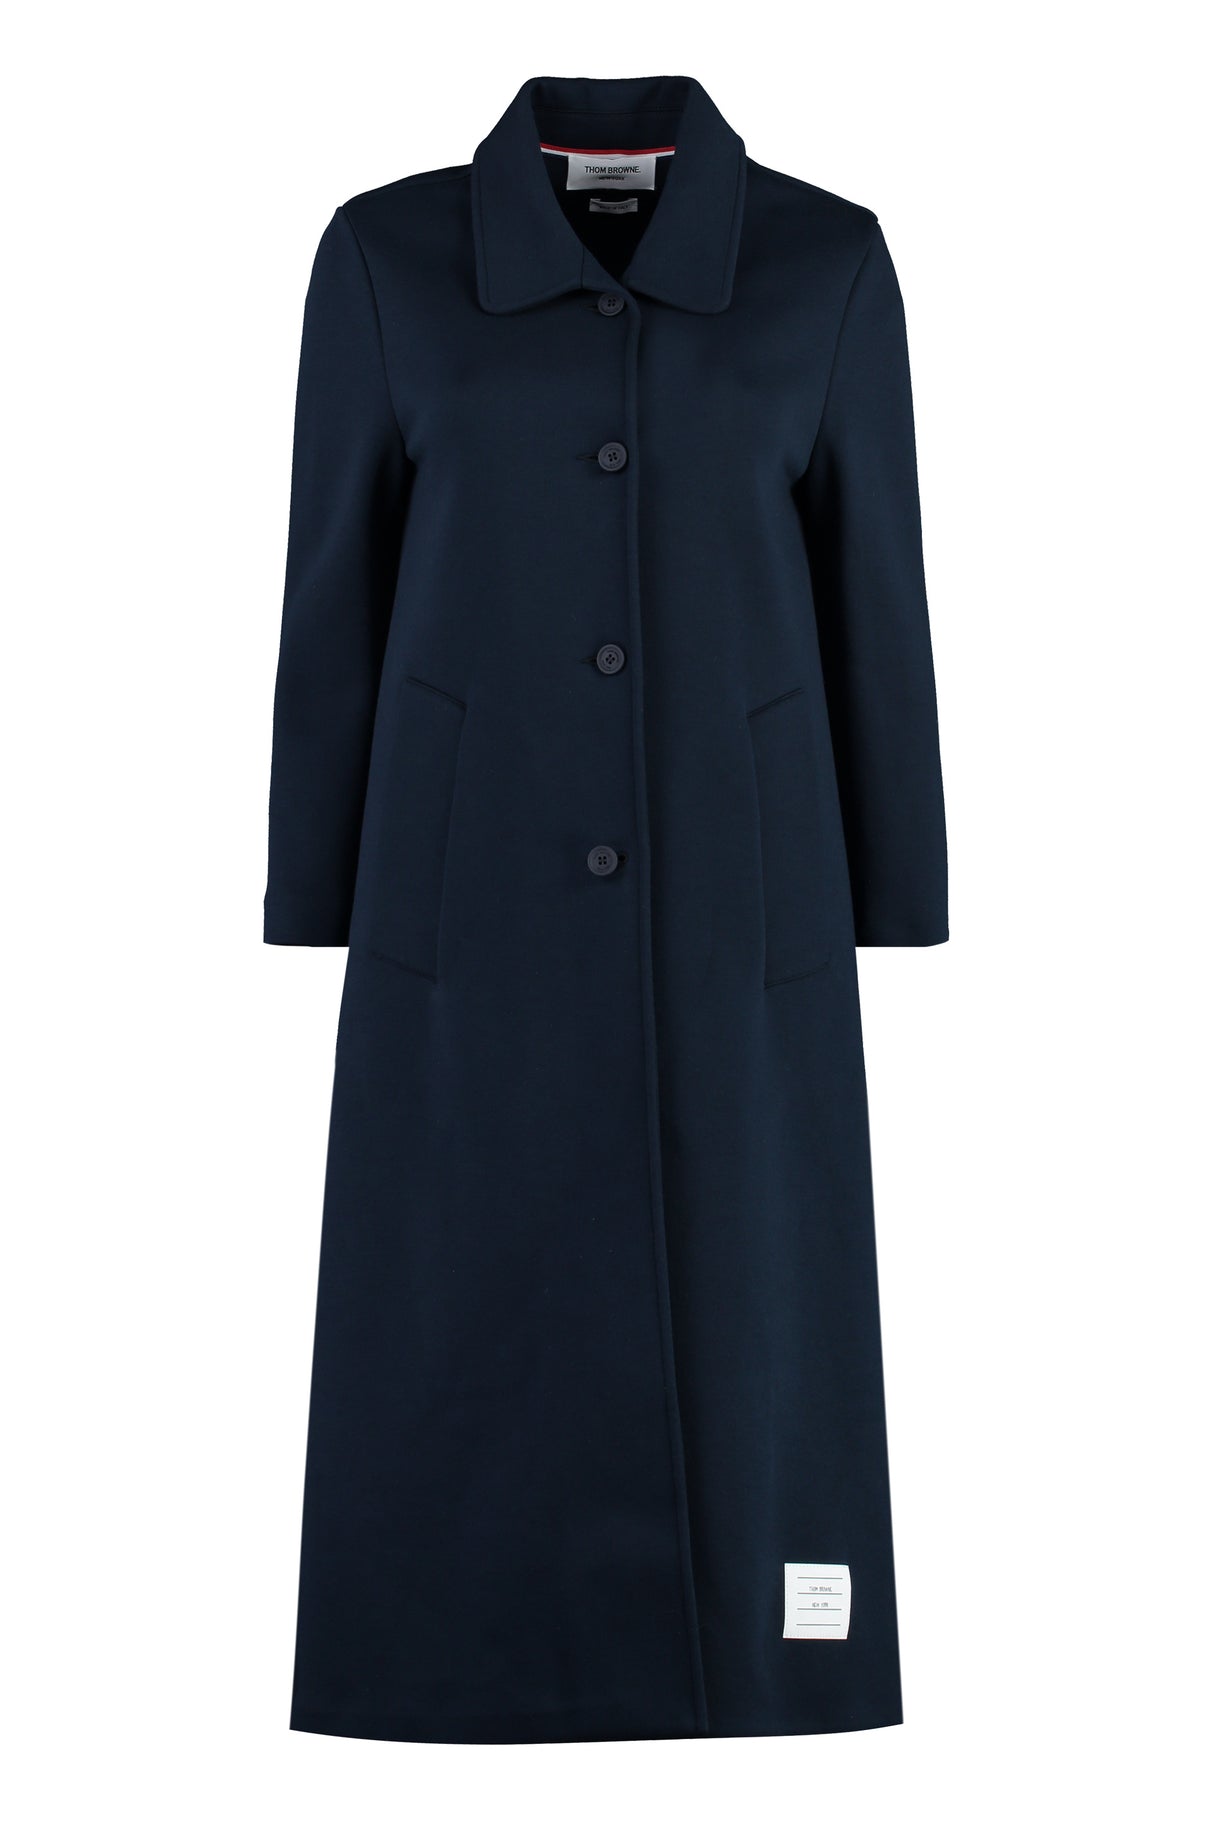 THOM BROWNE Blue Cotton Jacket for Women - FW23 Collection